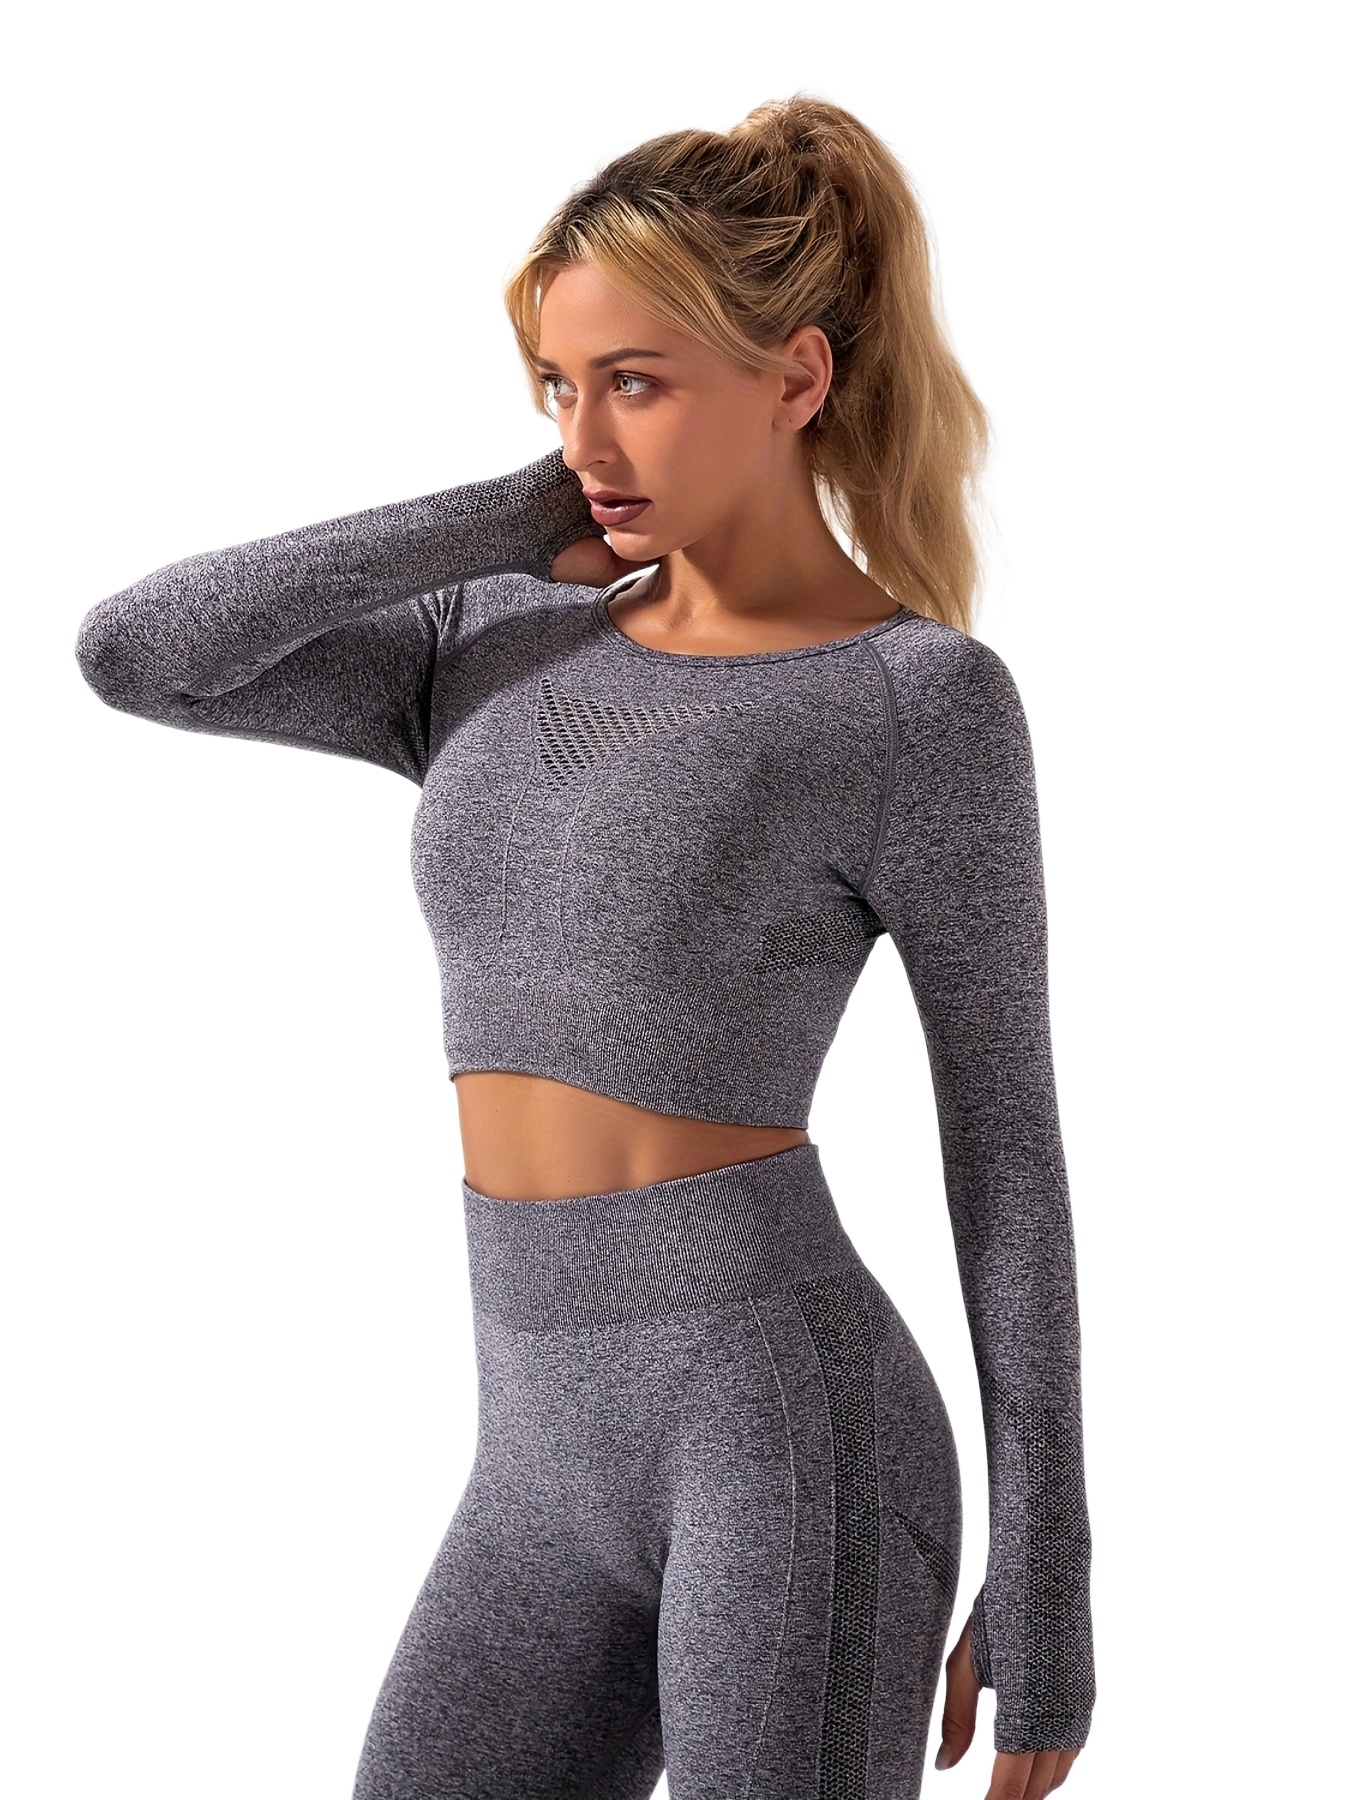 Yoga Outfits for Women 2 Piece Workout Sets Seamless Long Sleeve Crop Tops  Shirt with Thumb